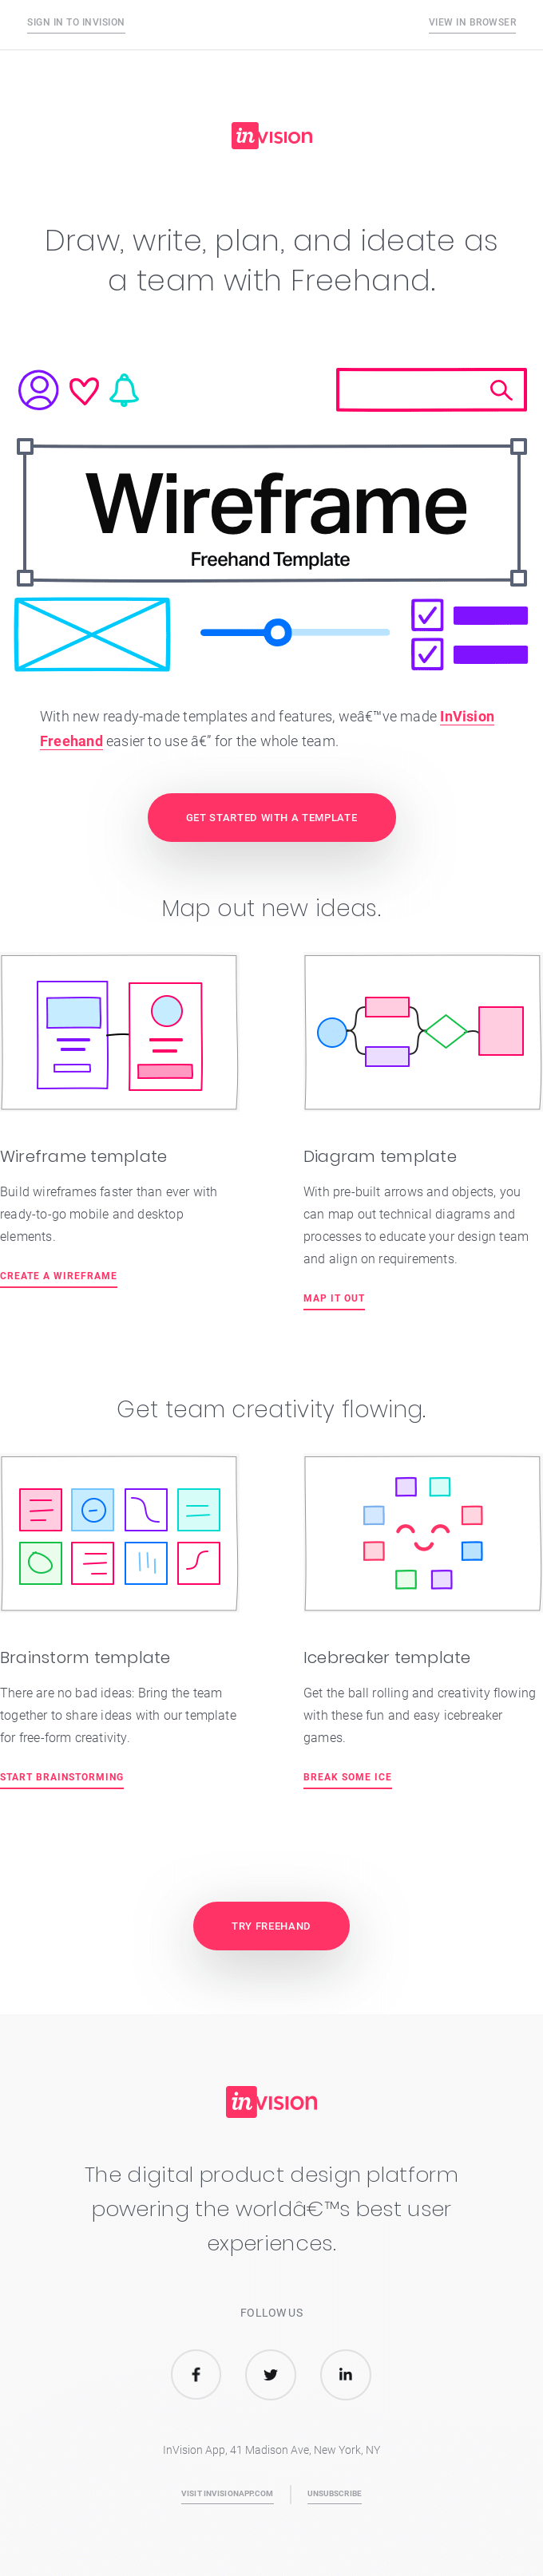 New for Freehand: Templates for brainstorms, wireframes, and more -Invision Email Newsletter